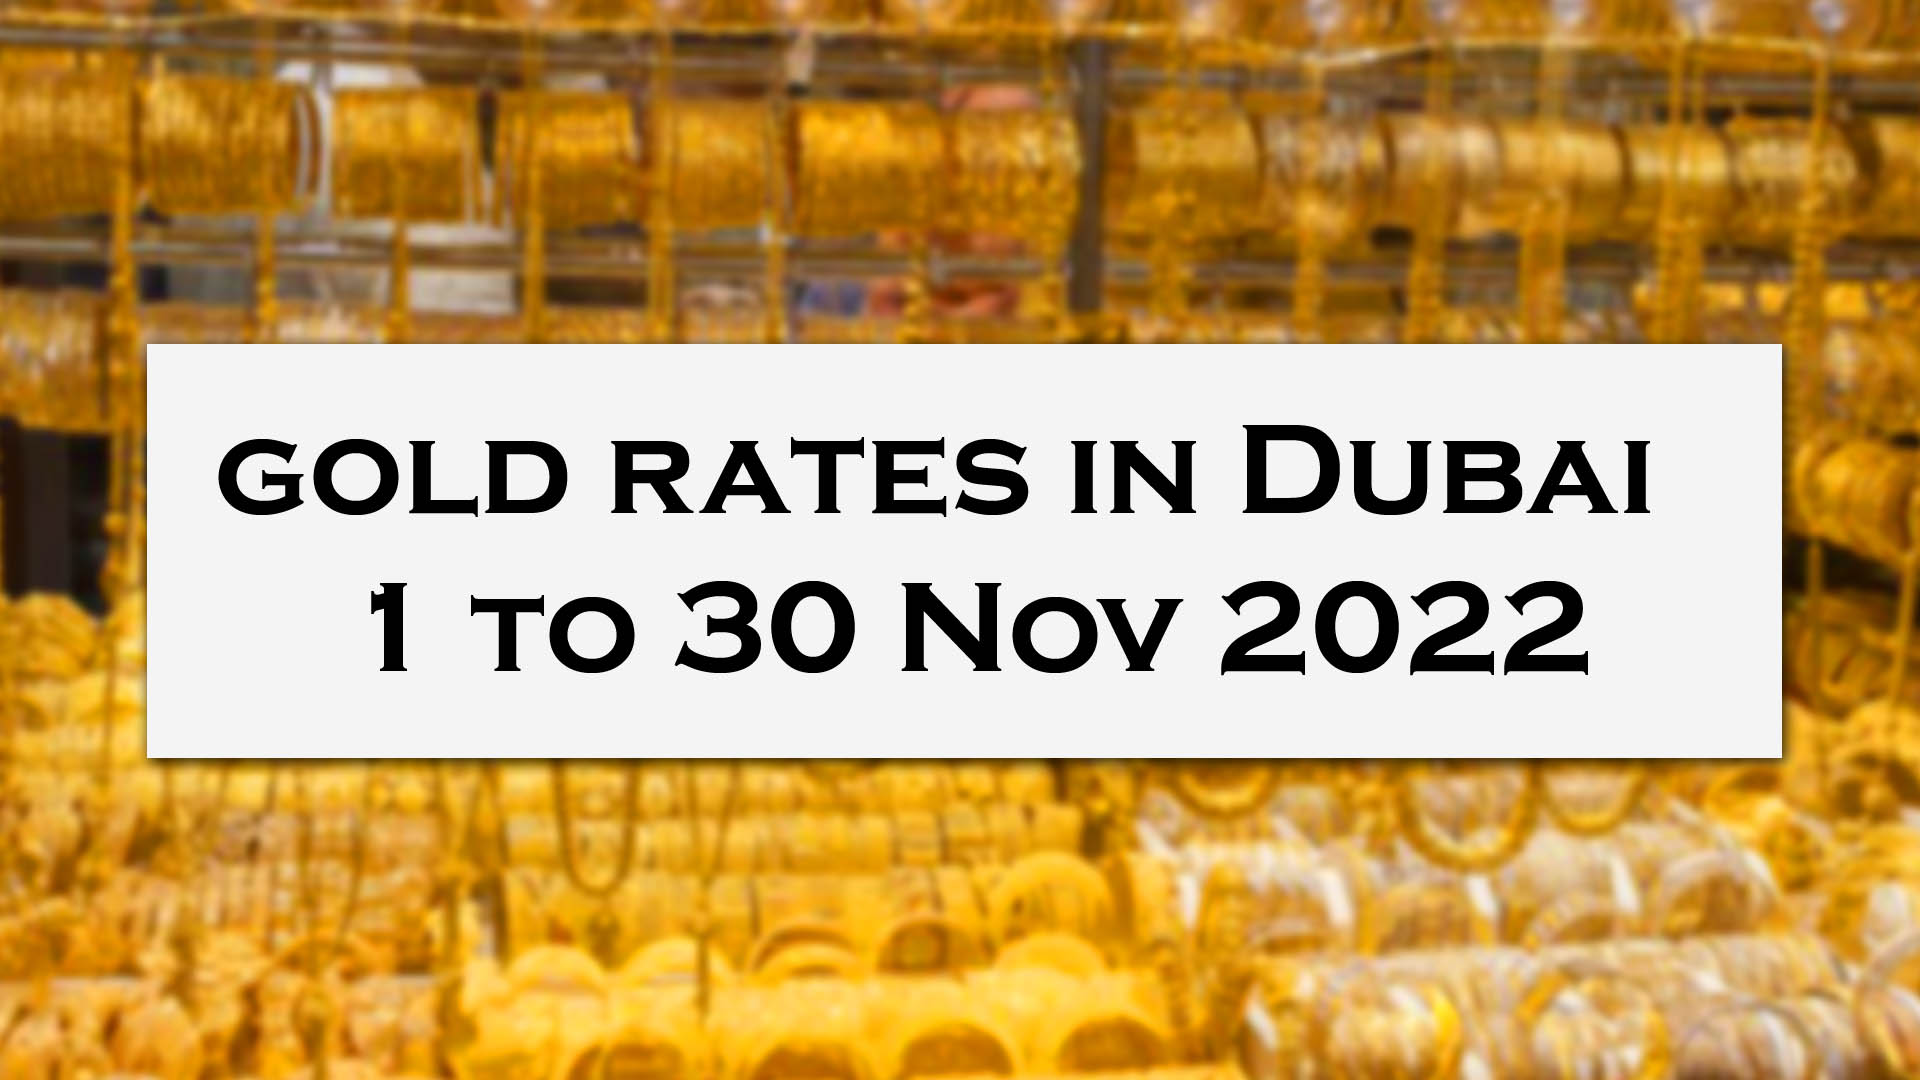 Historical gold rates in Dubai from 1 to 30 November 2022